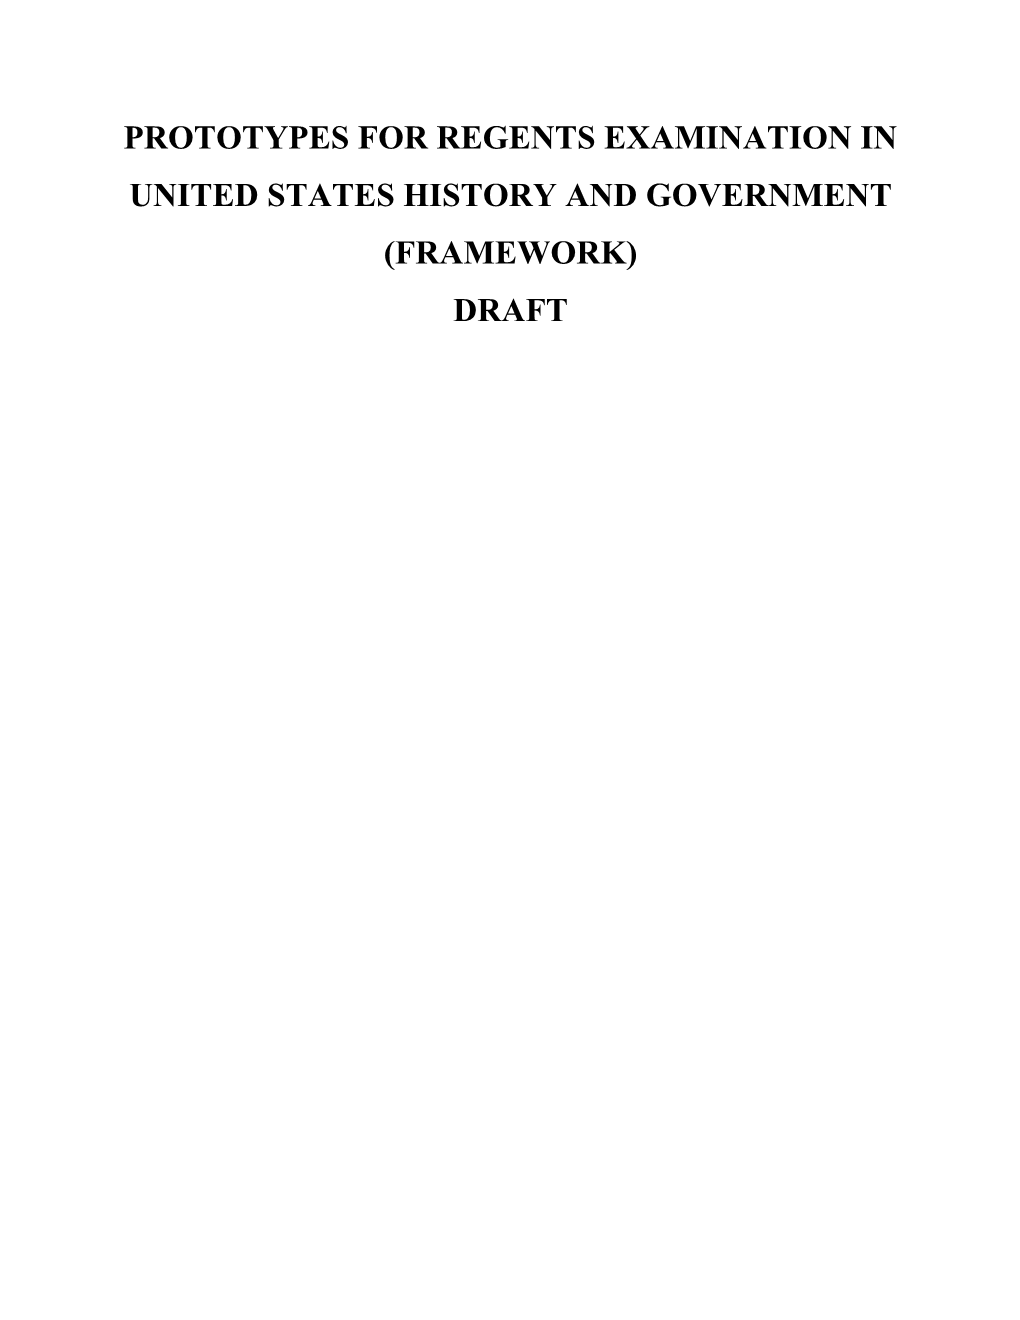 Prototype for Regents Examination in United States History and Government (Framework)